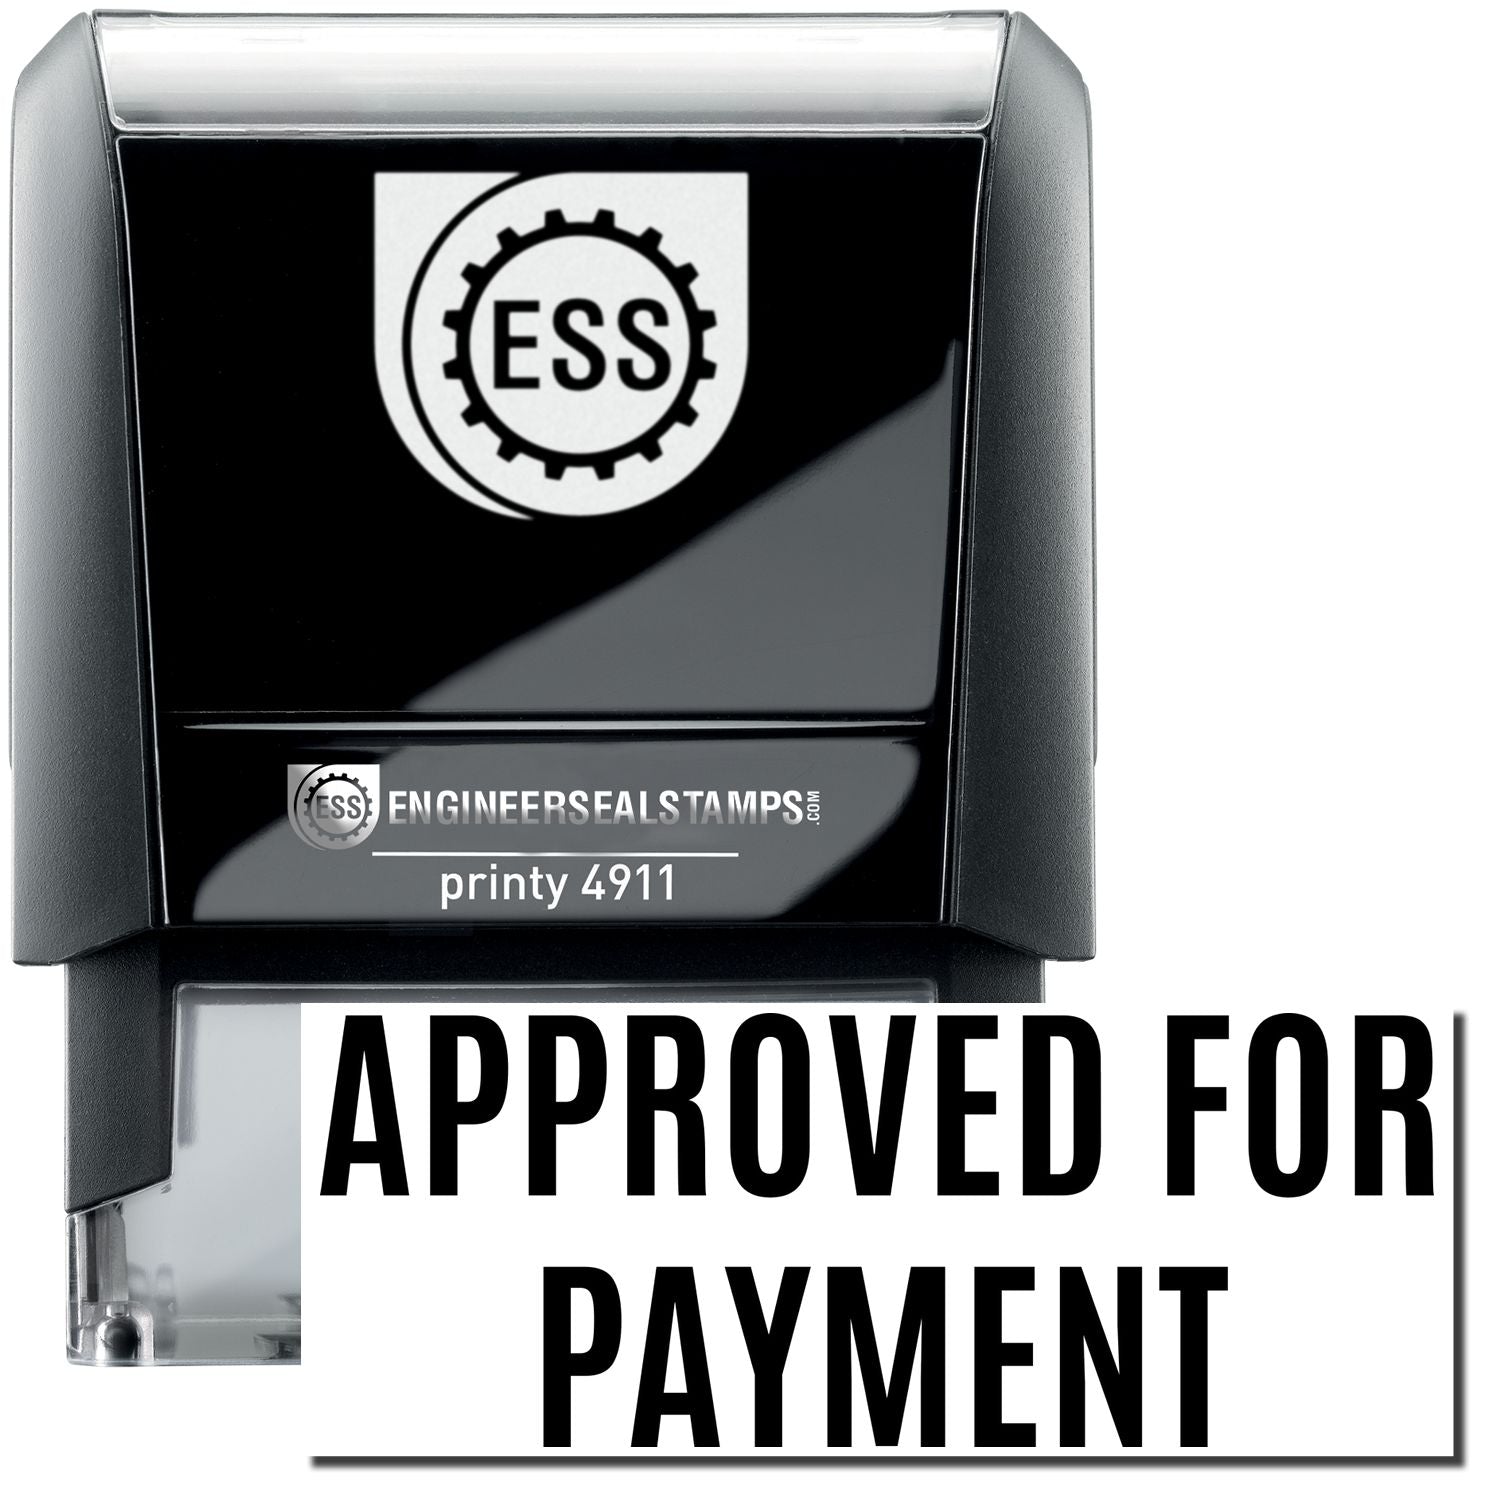 A self-inking stamp with a stamped image showing how the text "APPROVED FOR PAYMENT" in a narrow font is displayed after stamping.